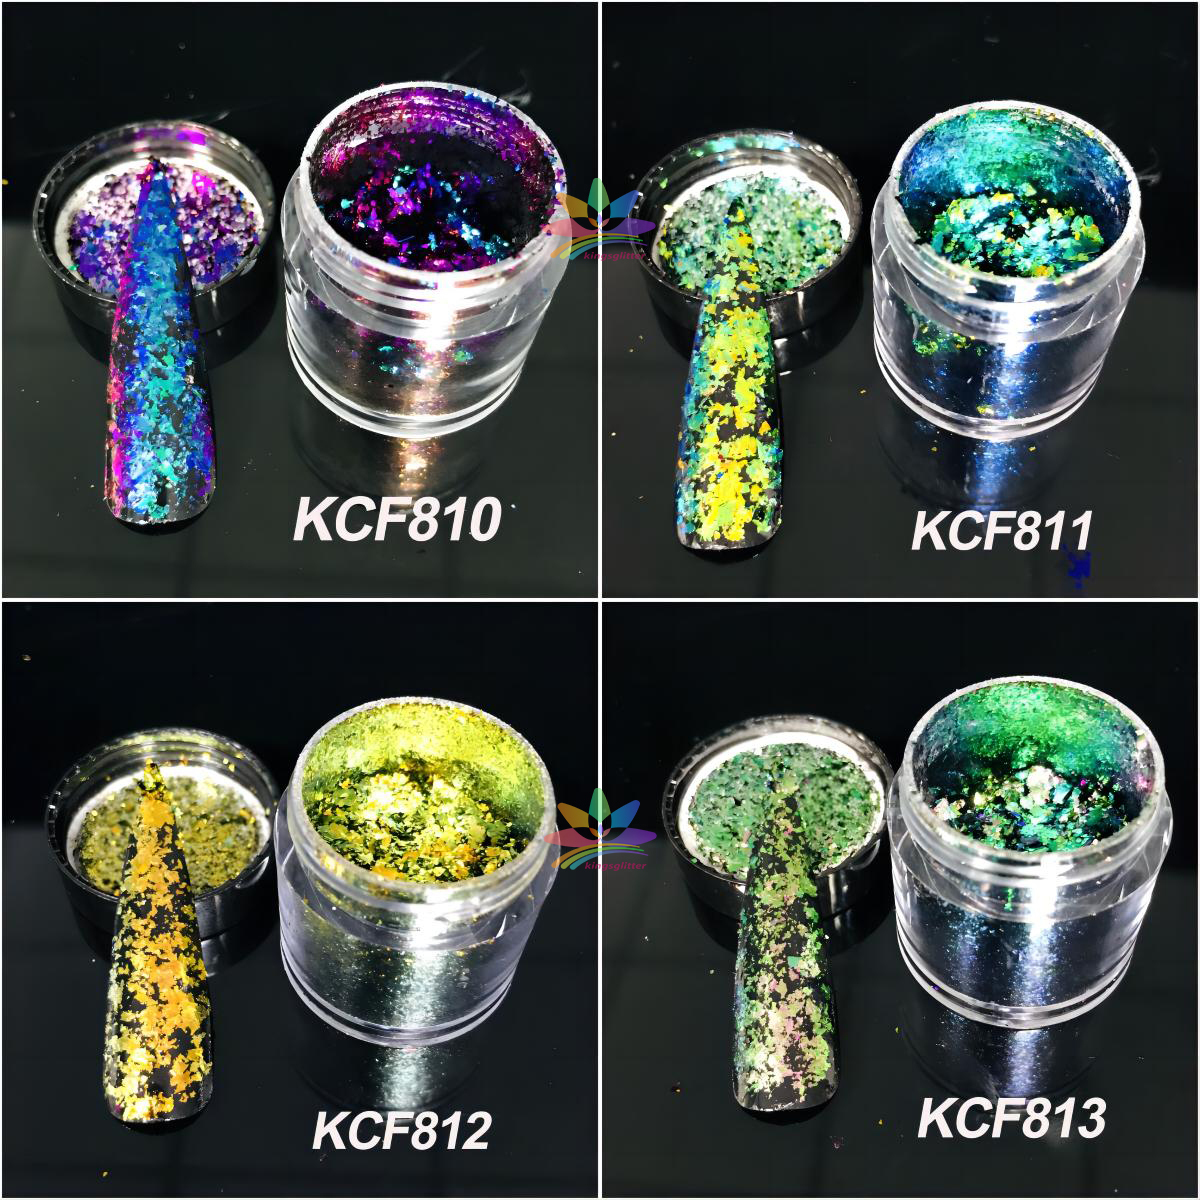 KCF810 High quality new sparkly multichrome Chameleon Flakes for nails eye  shadow